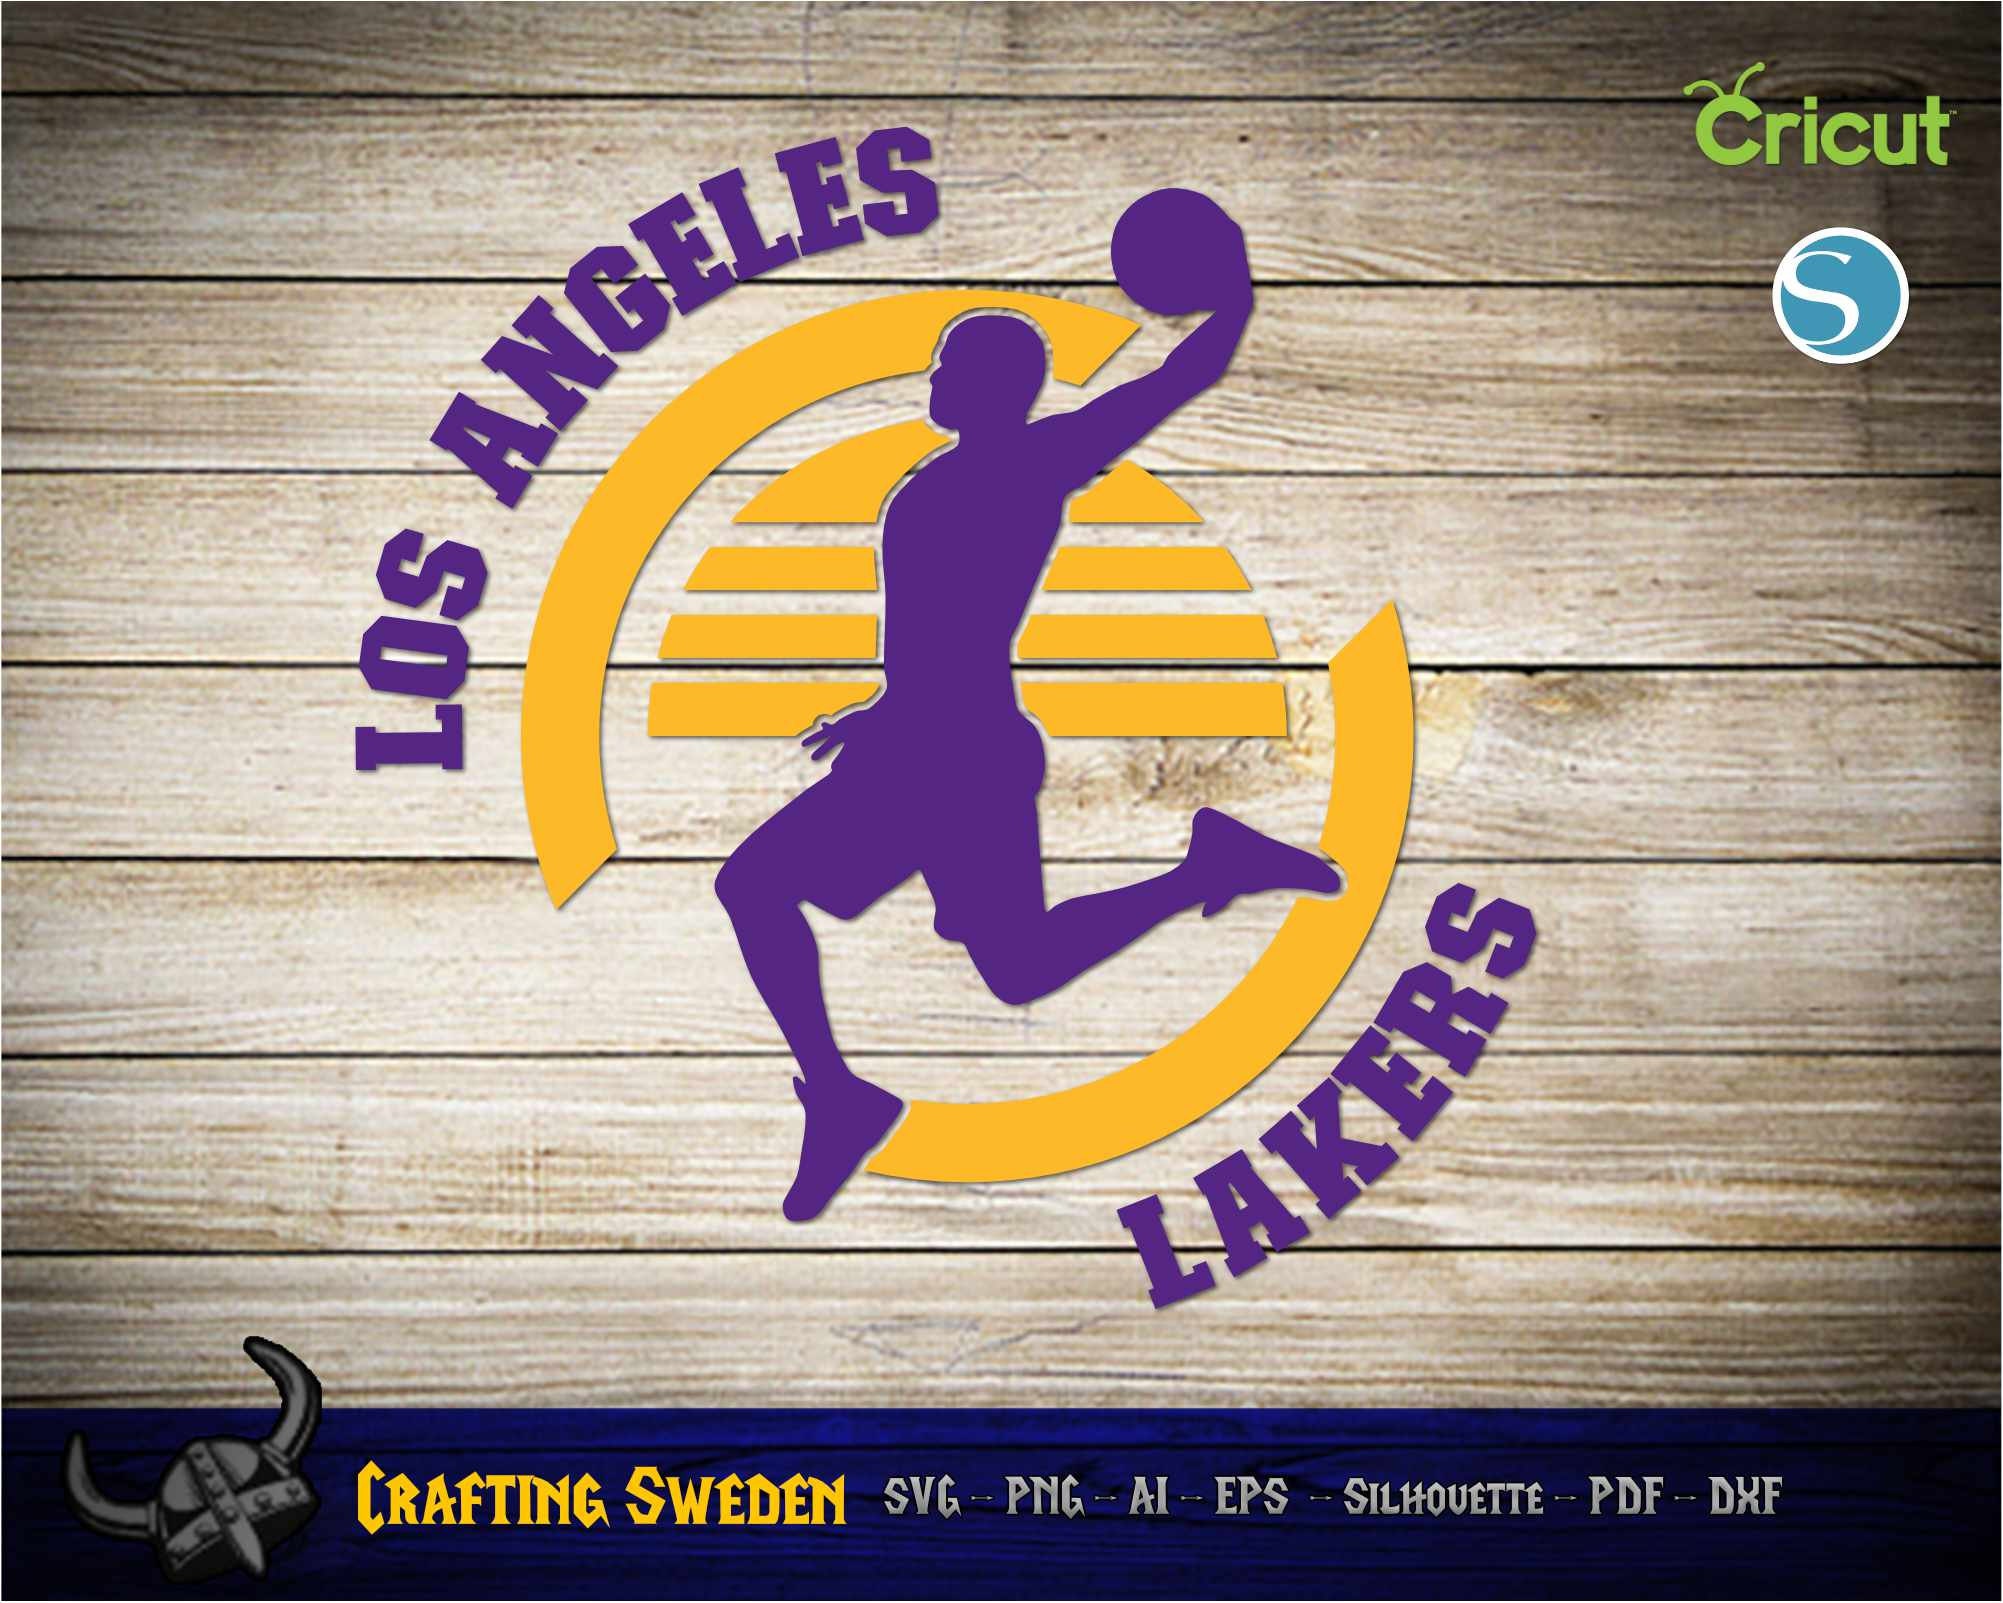 Los Angeles Lakers Pack Embroidery Designs Download - EmbroideryDownload